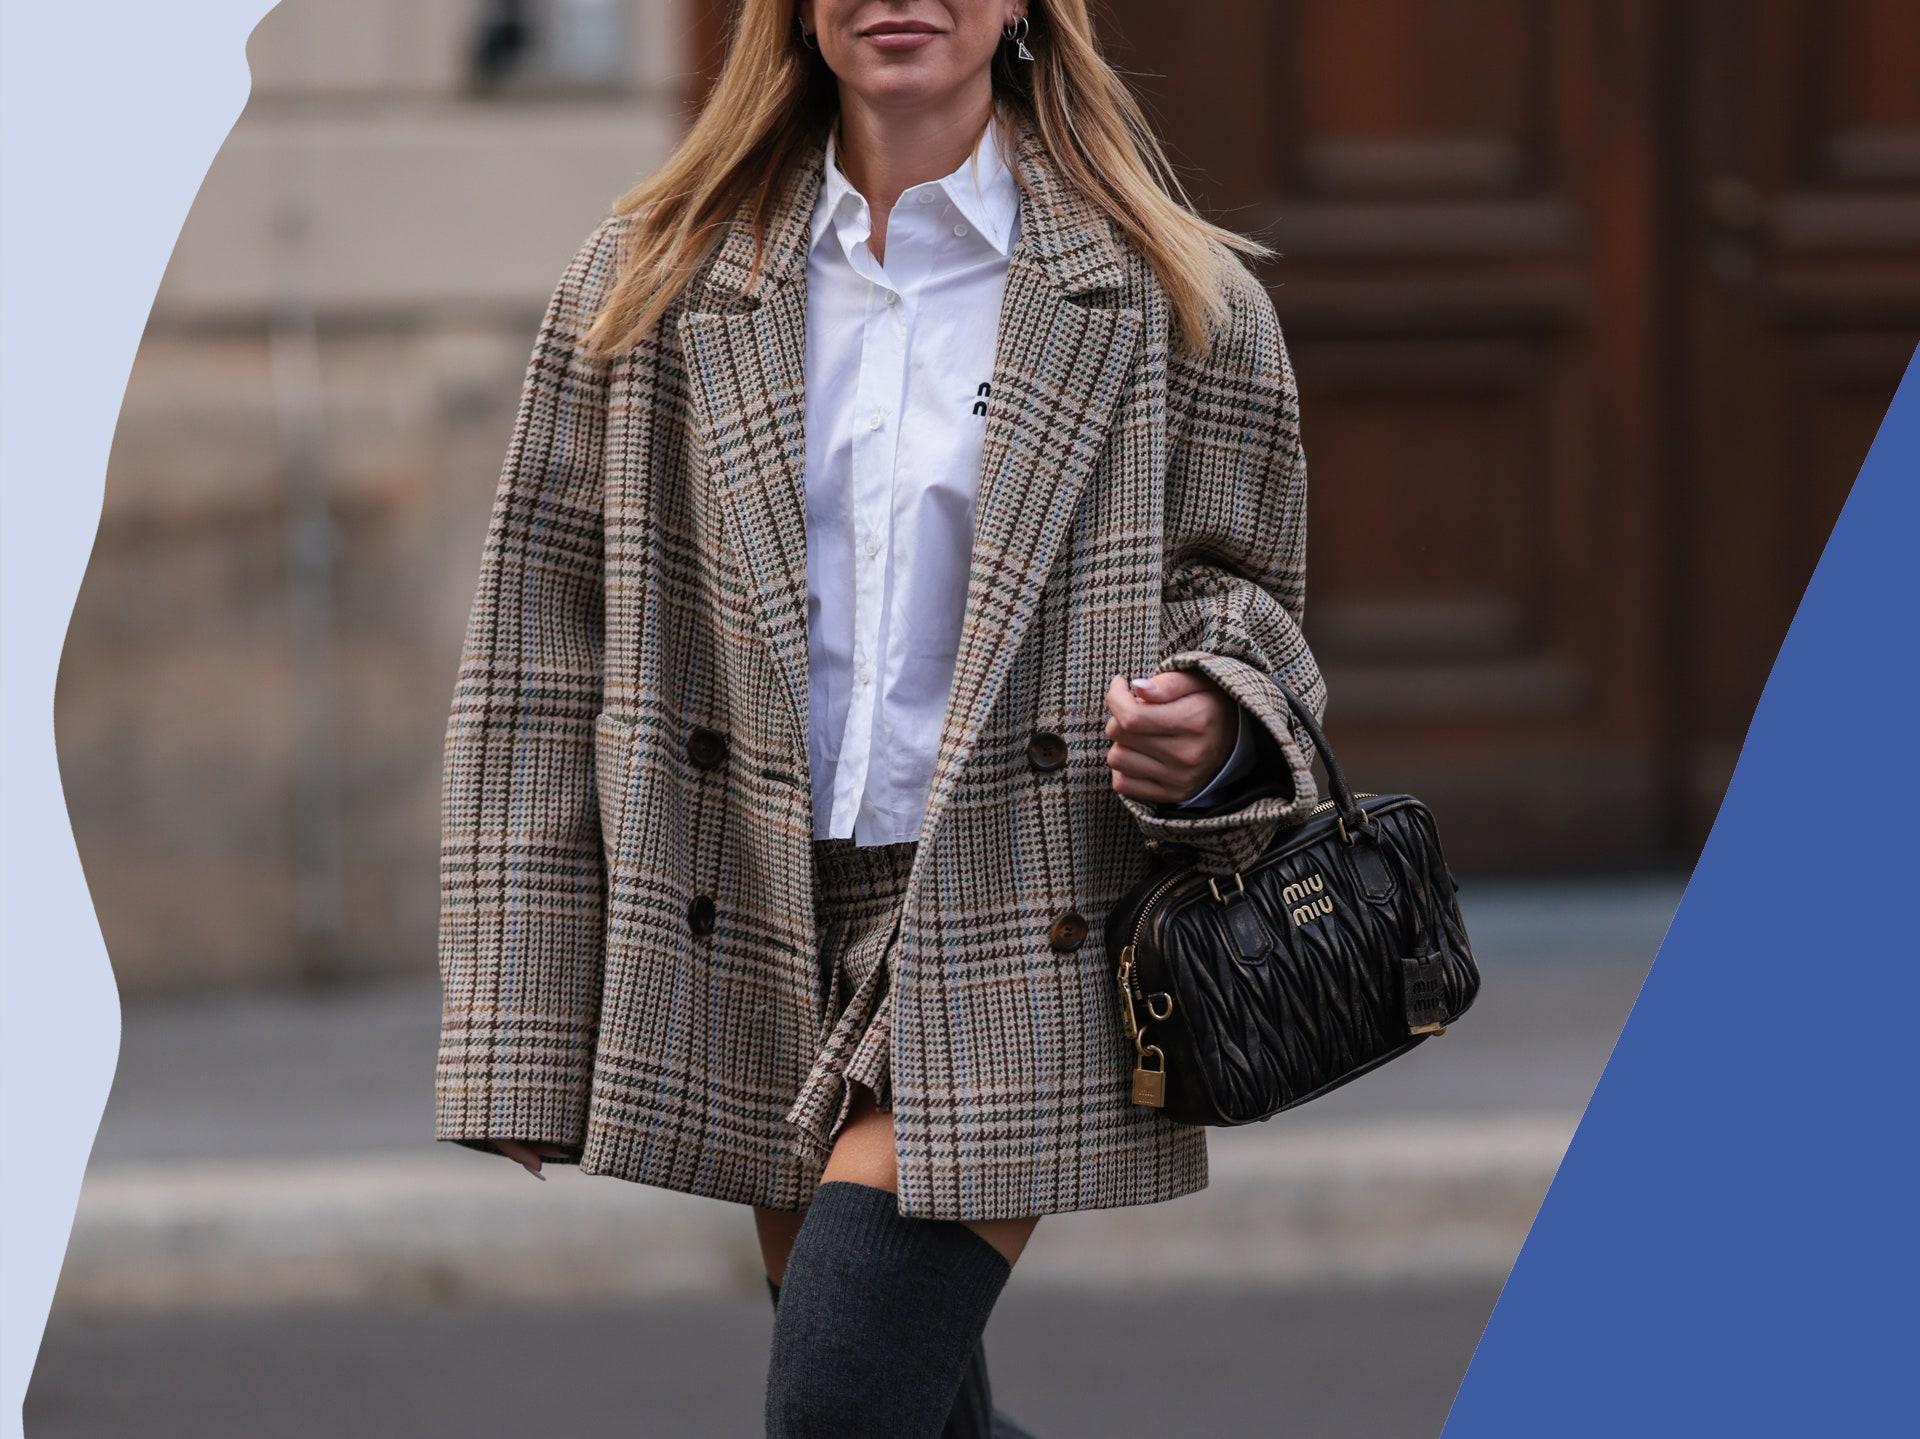 Preppycore Aesthetic How To Get The Look Glamour Uk